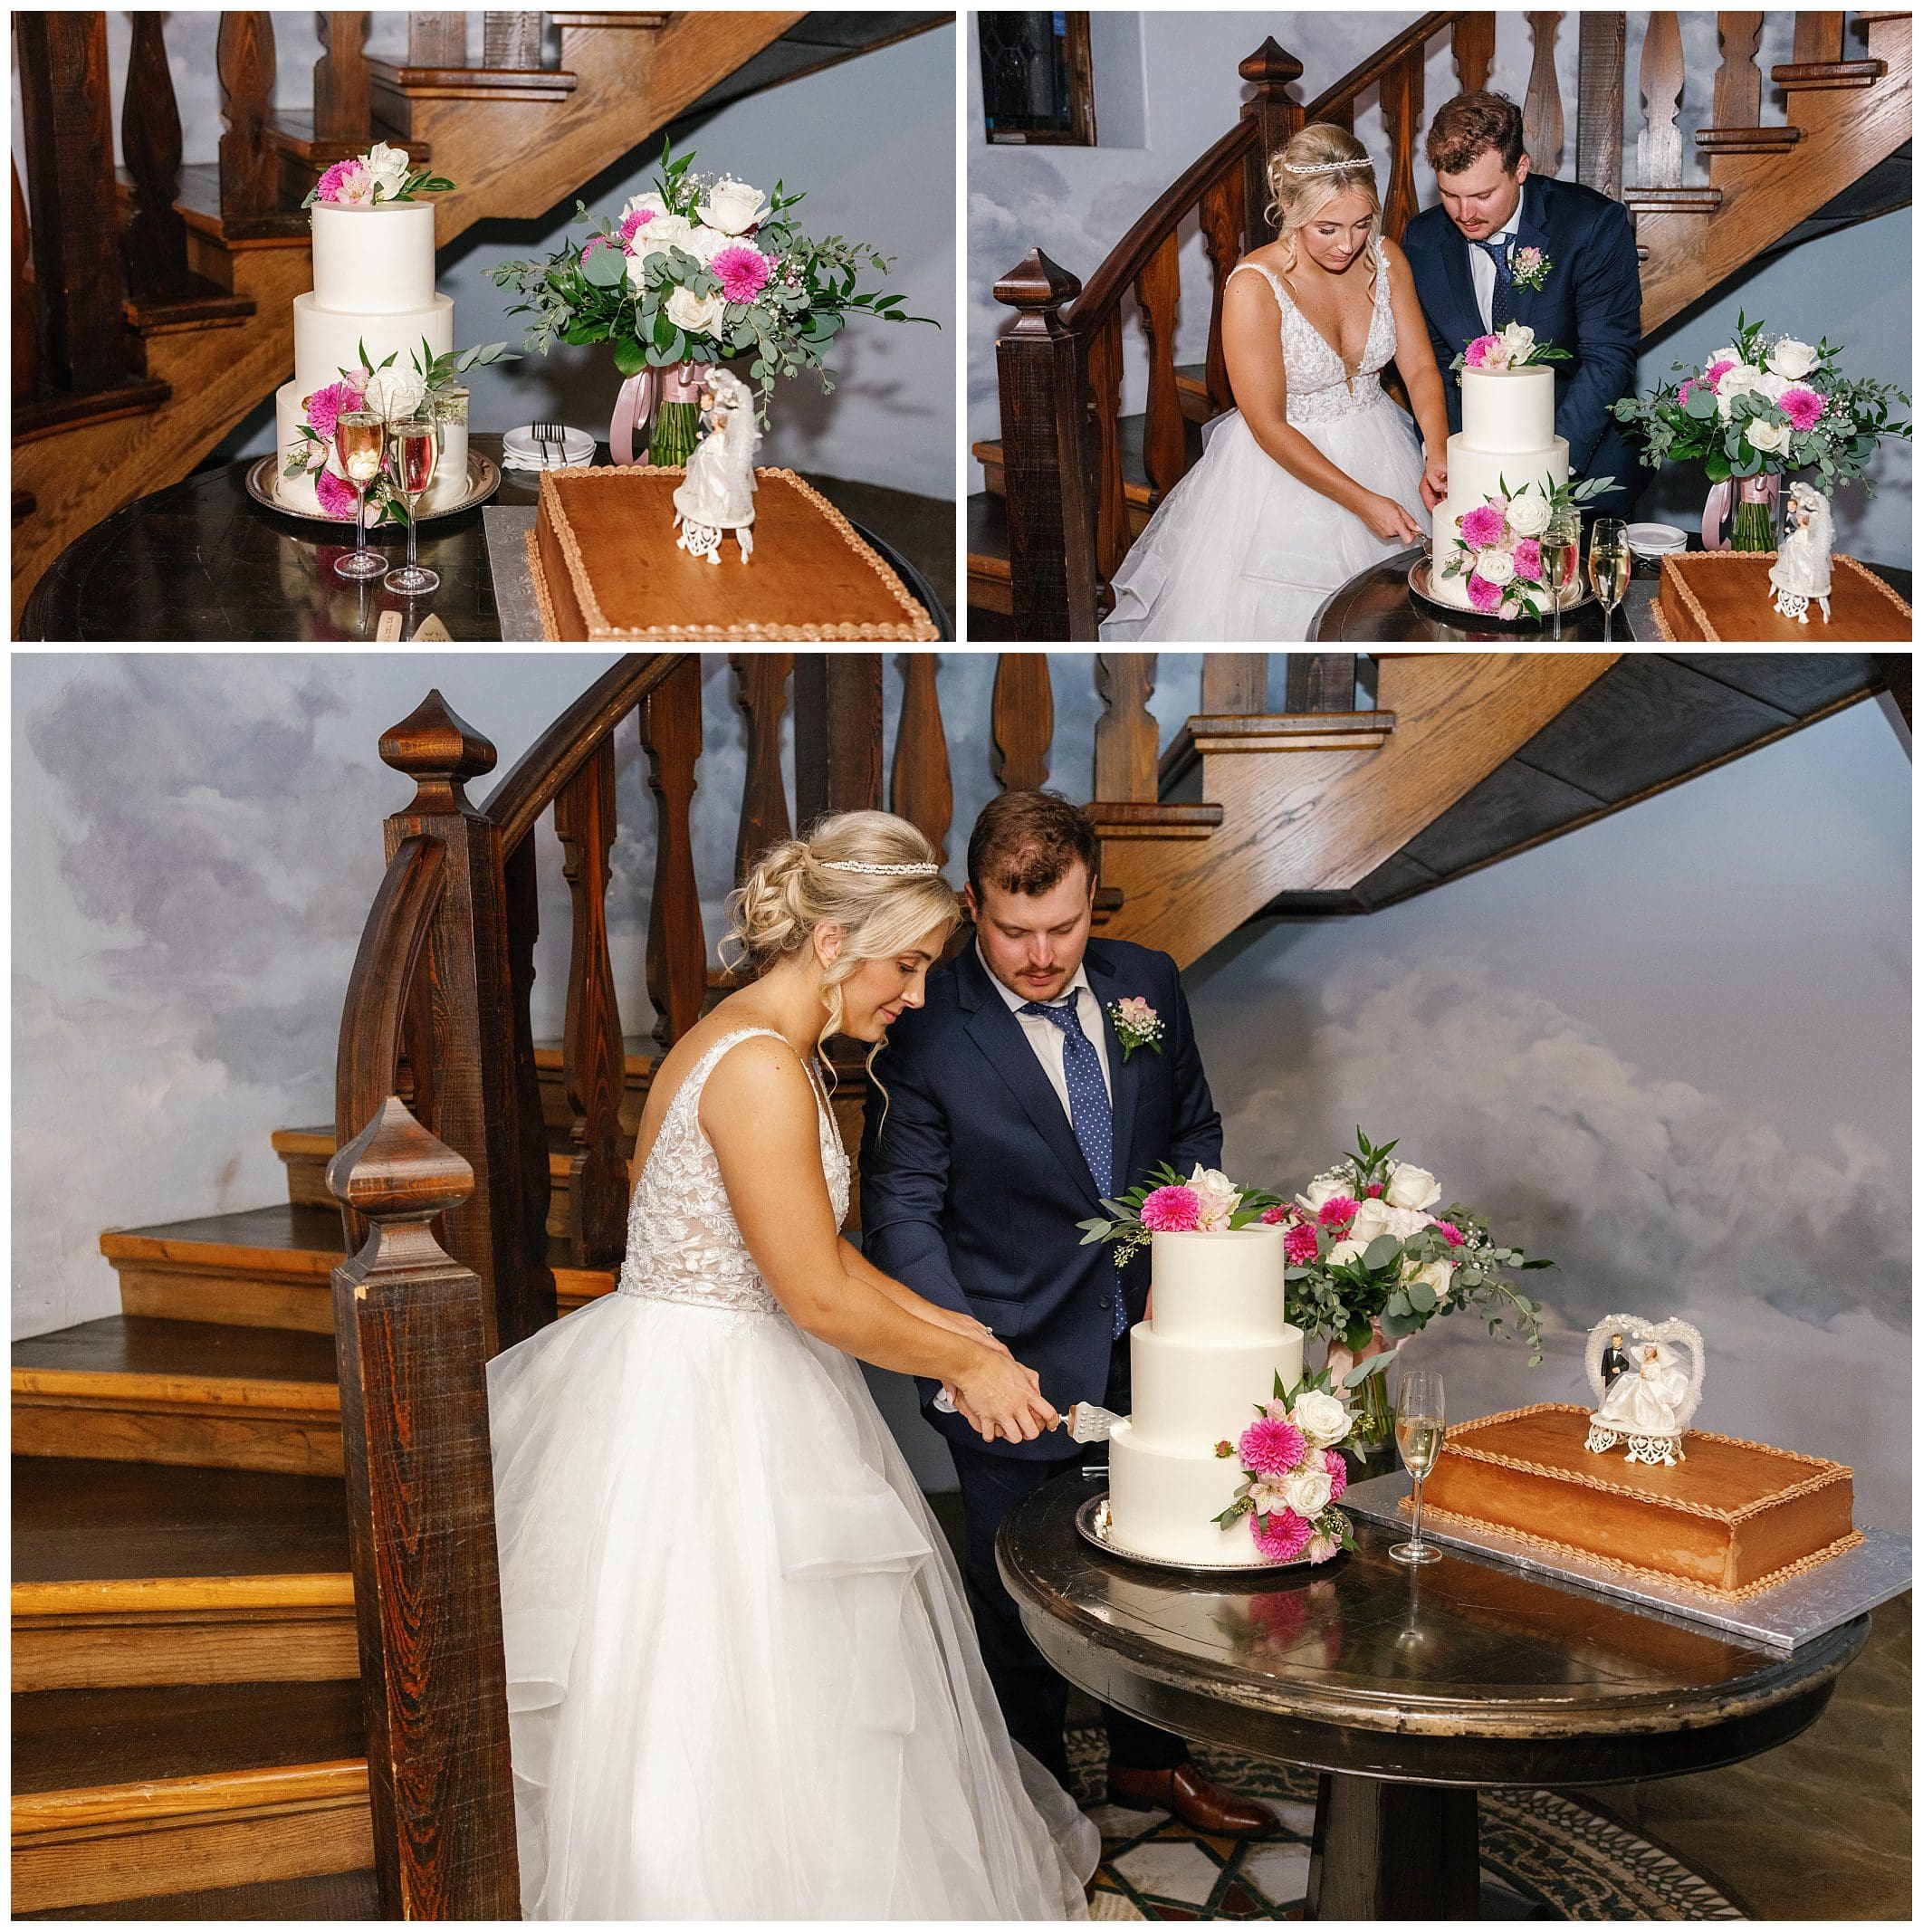 A bride and groom cutting their wedding cake in front of a staircase.